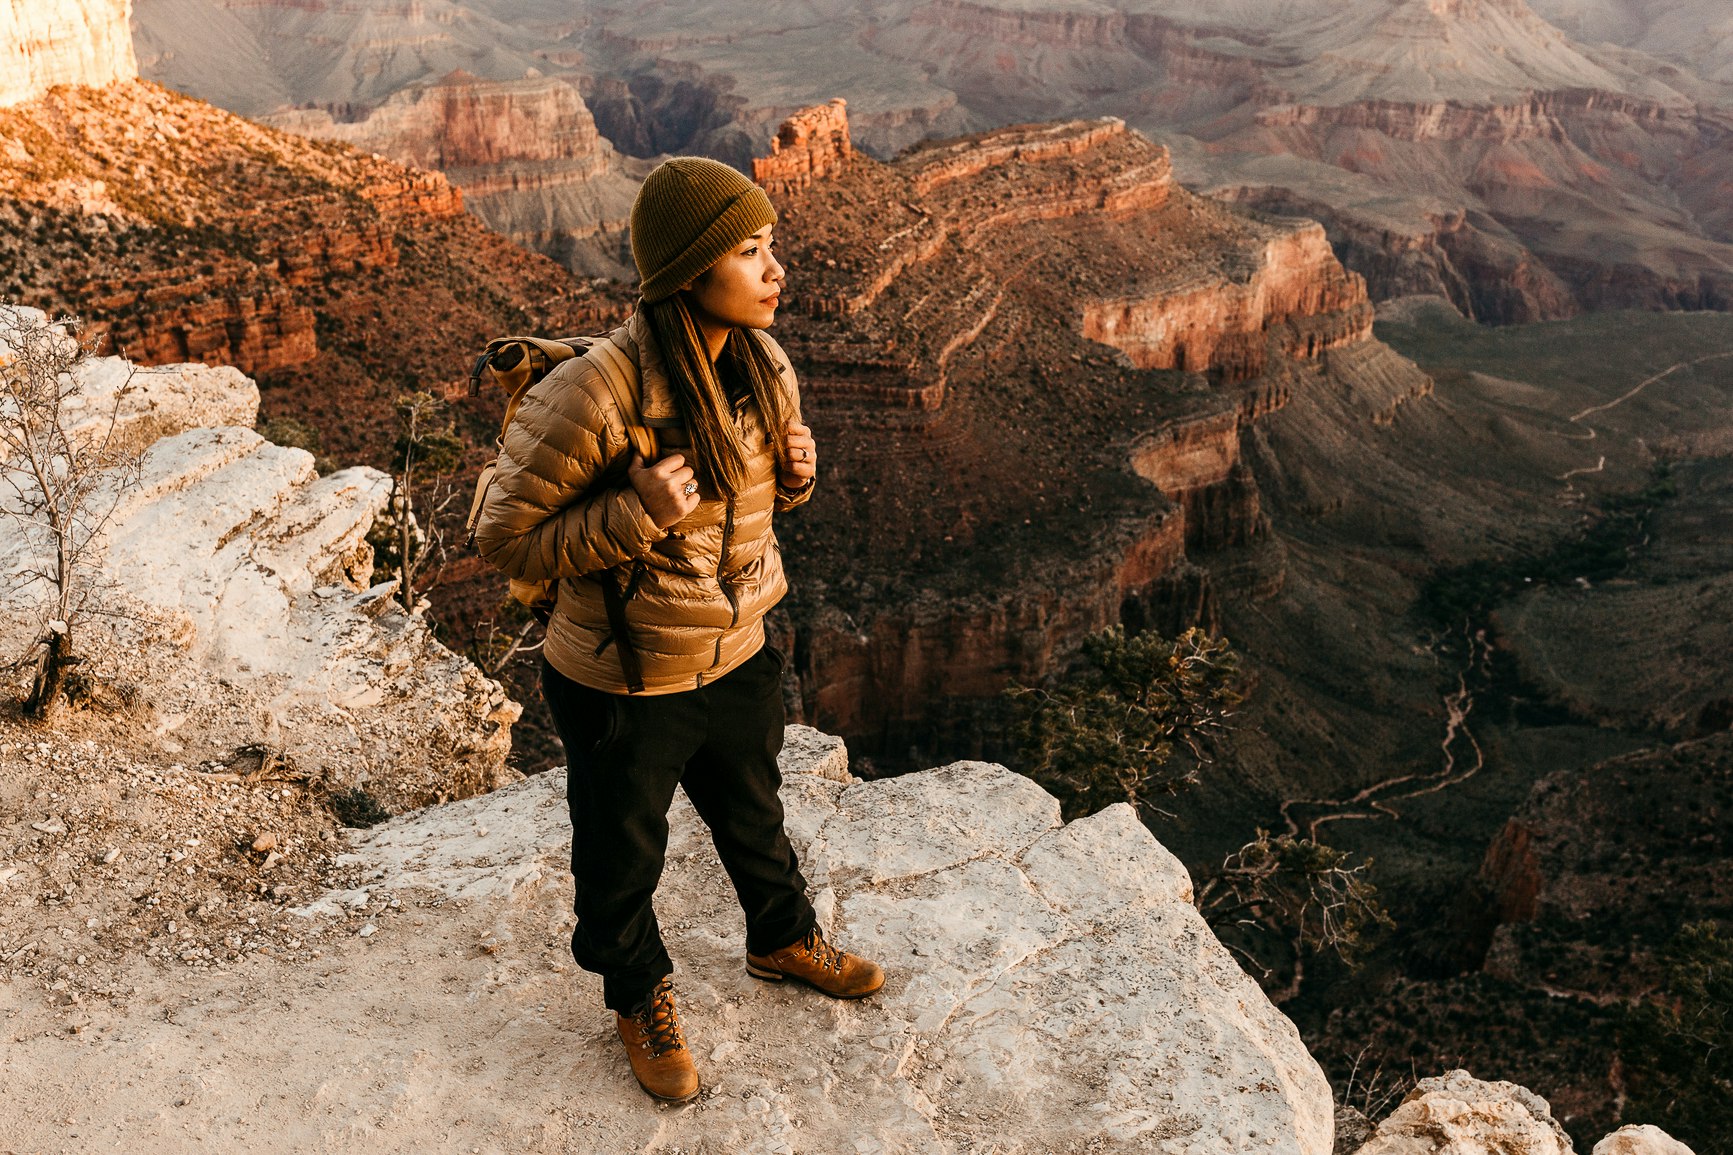 A woman looking out over the rim of the Grand Canyon